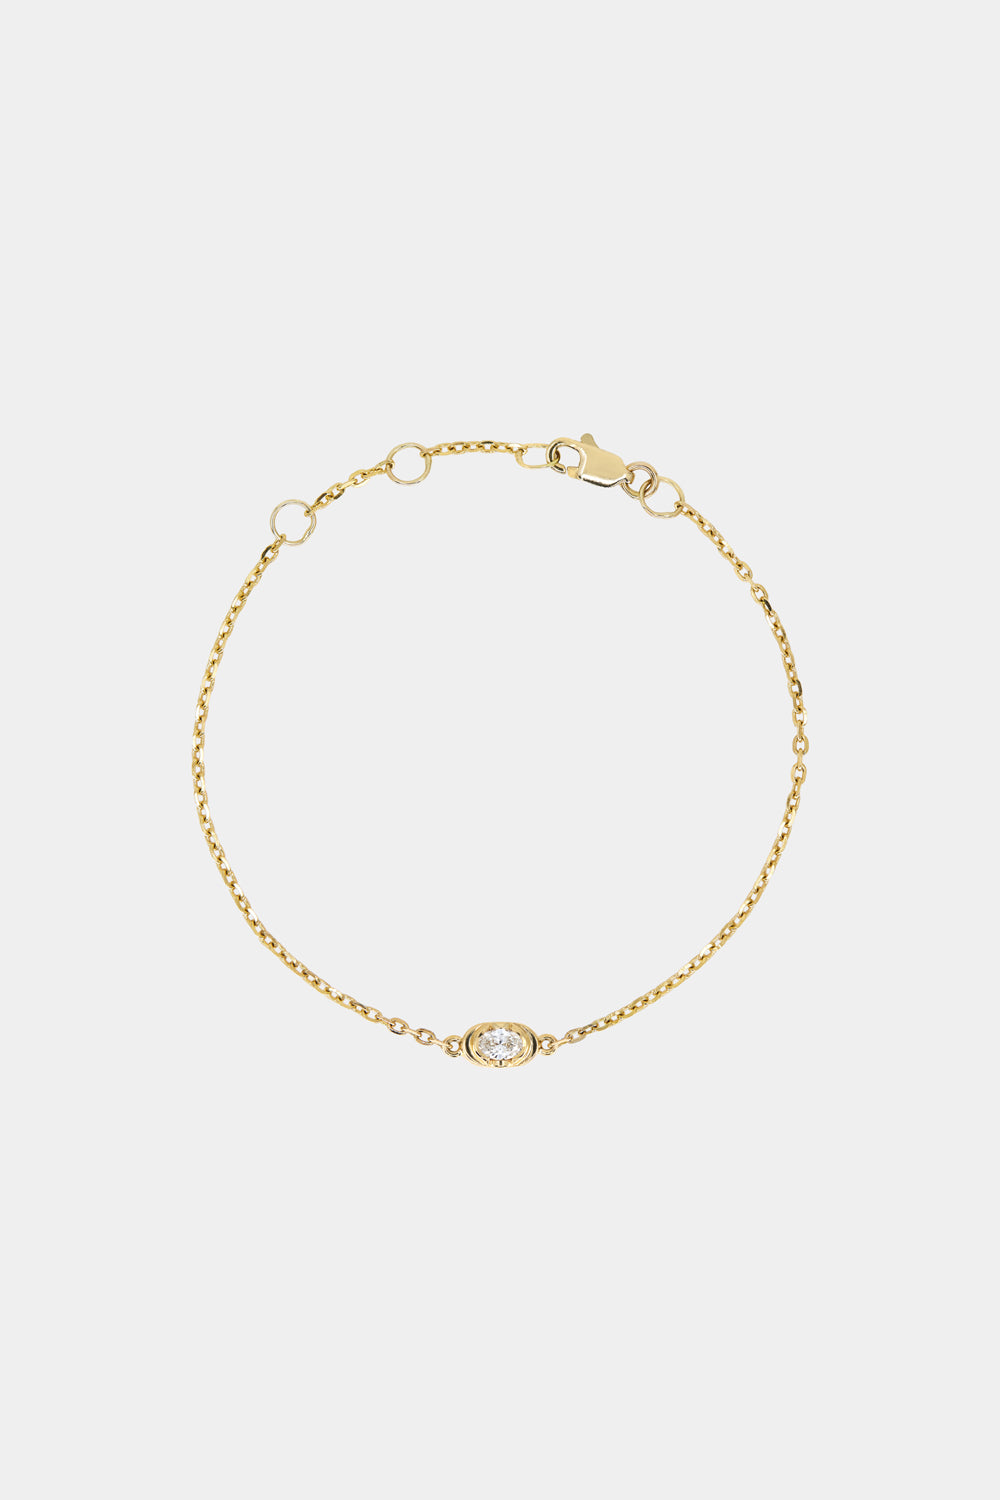 Oval Diamond Bracelet | 9K Yellow or Rose Gold, More Options Available